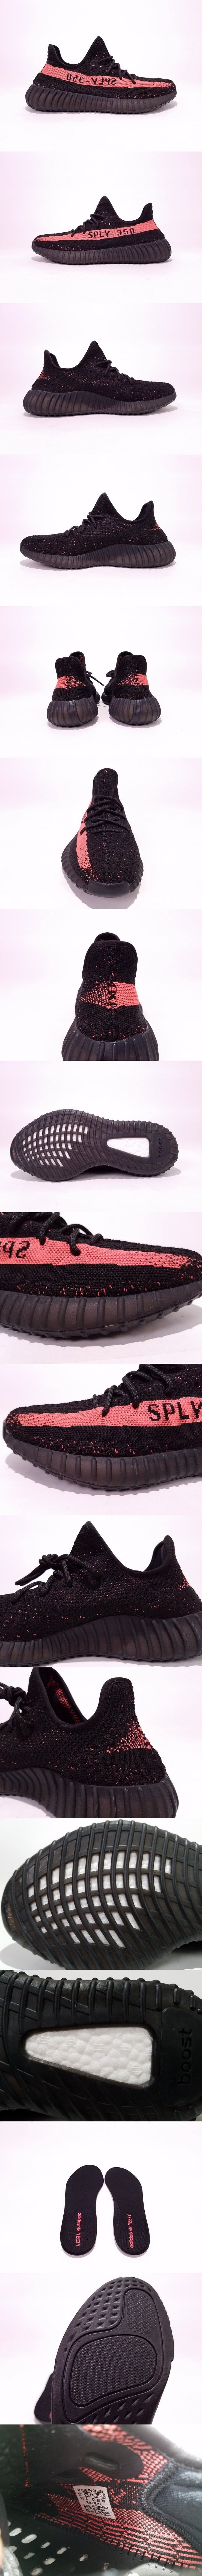 Adidas Yeezy Boost 350 V2 Core Black/Red Real Boost BY9612 イージーブースト350